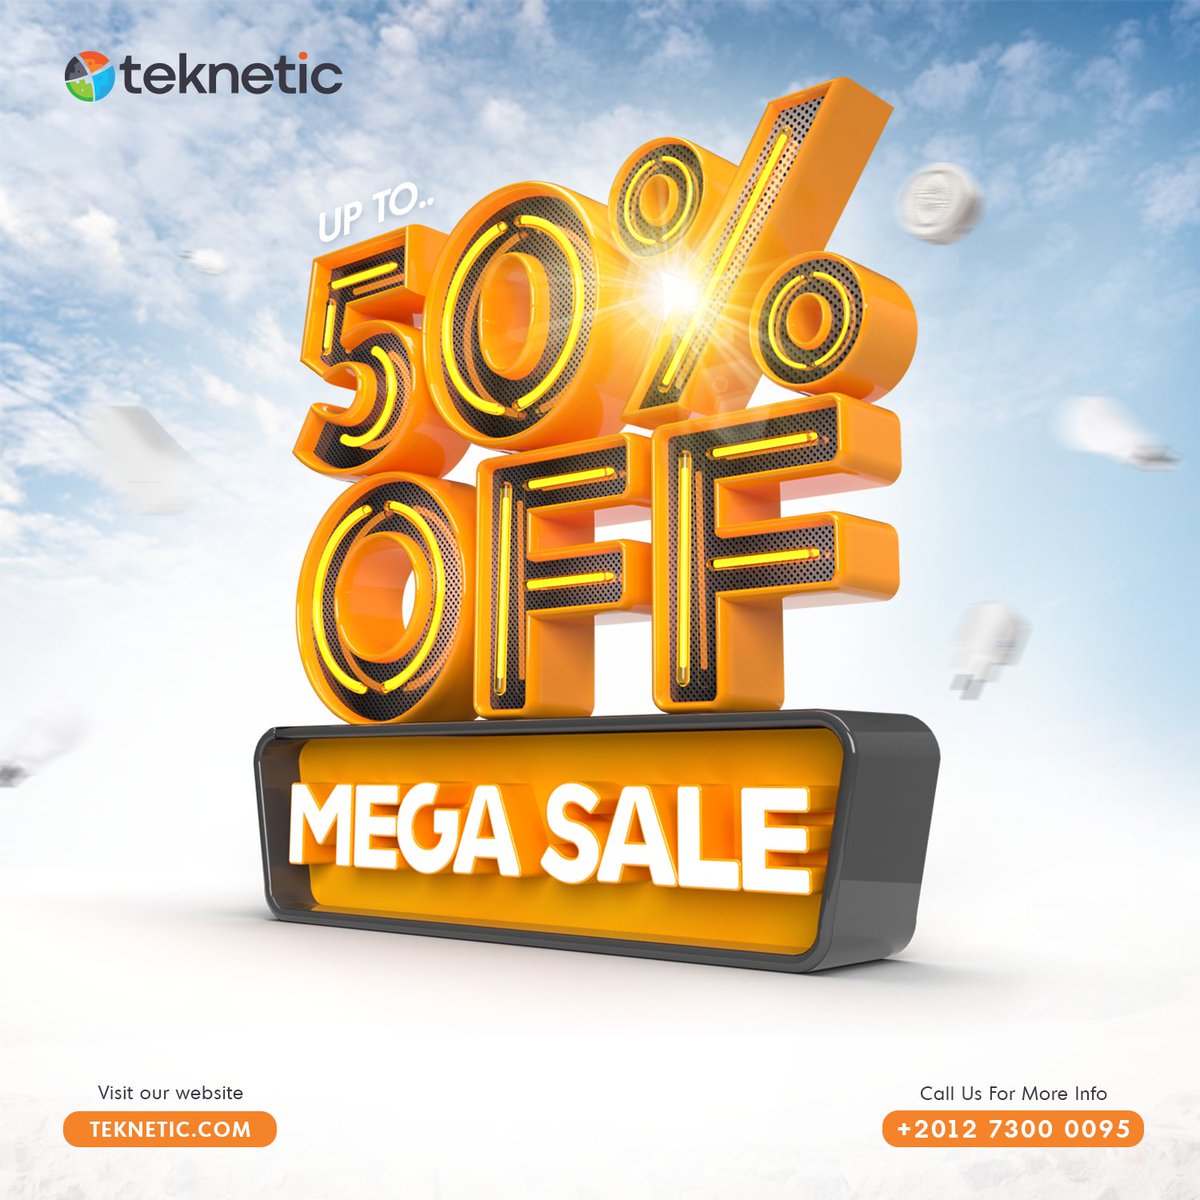 Upgrade to a smarter home! Get up to 𝟱𝟬% 𝗼𝗳𝗳 on smart home essentials to make your life easier. Shop now before the sale ends!

teknetic.com/eshop
#50offsale #smarthome #smarthomeautomation #Megasale #summersales #summer #automation #smartsolution #homeautomation